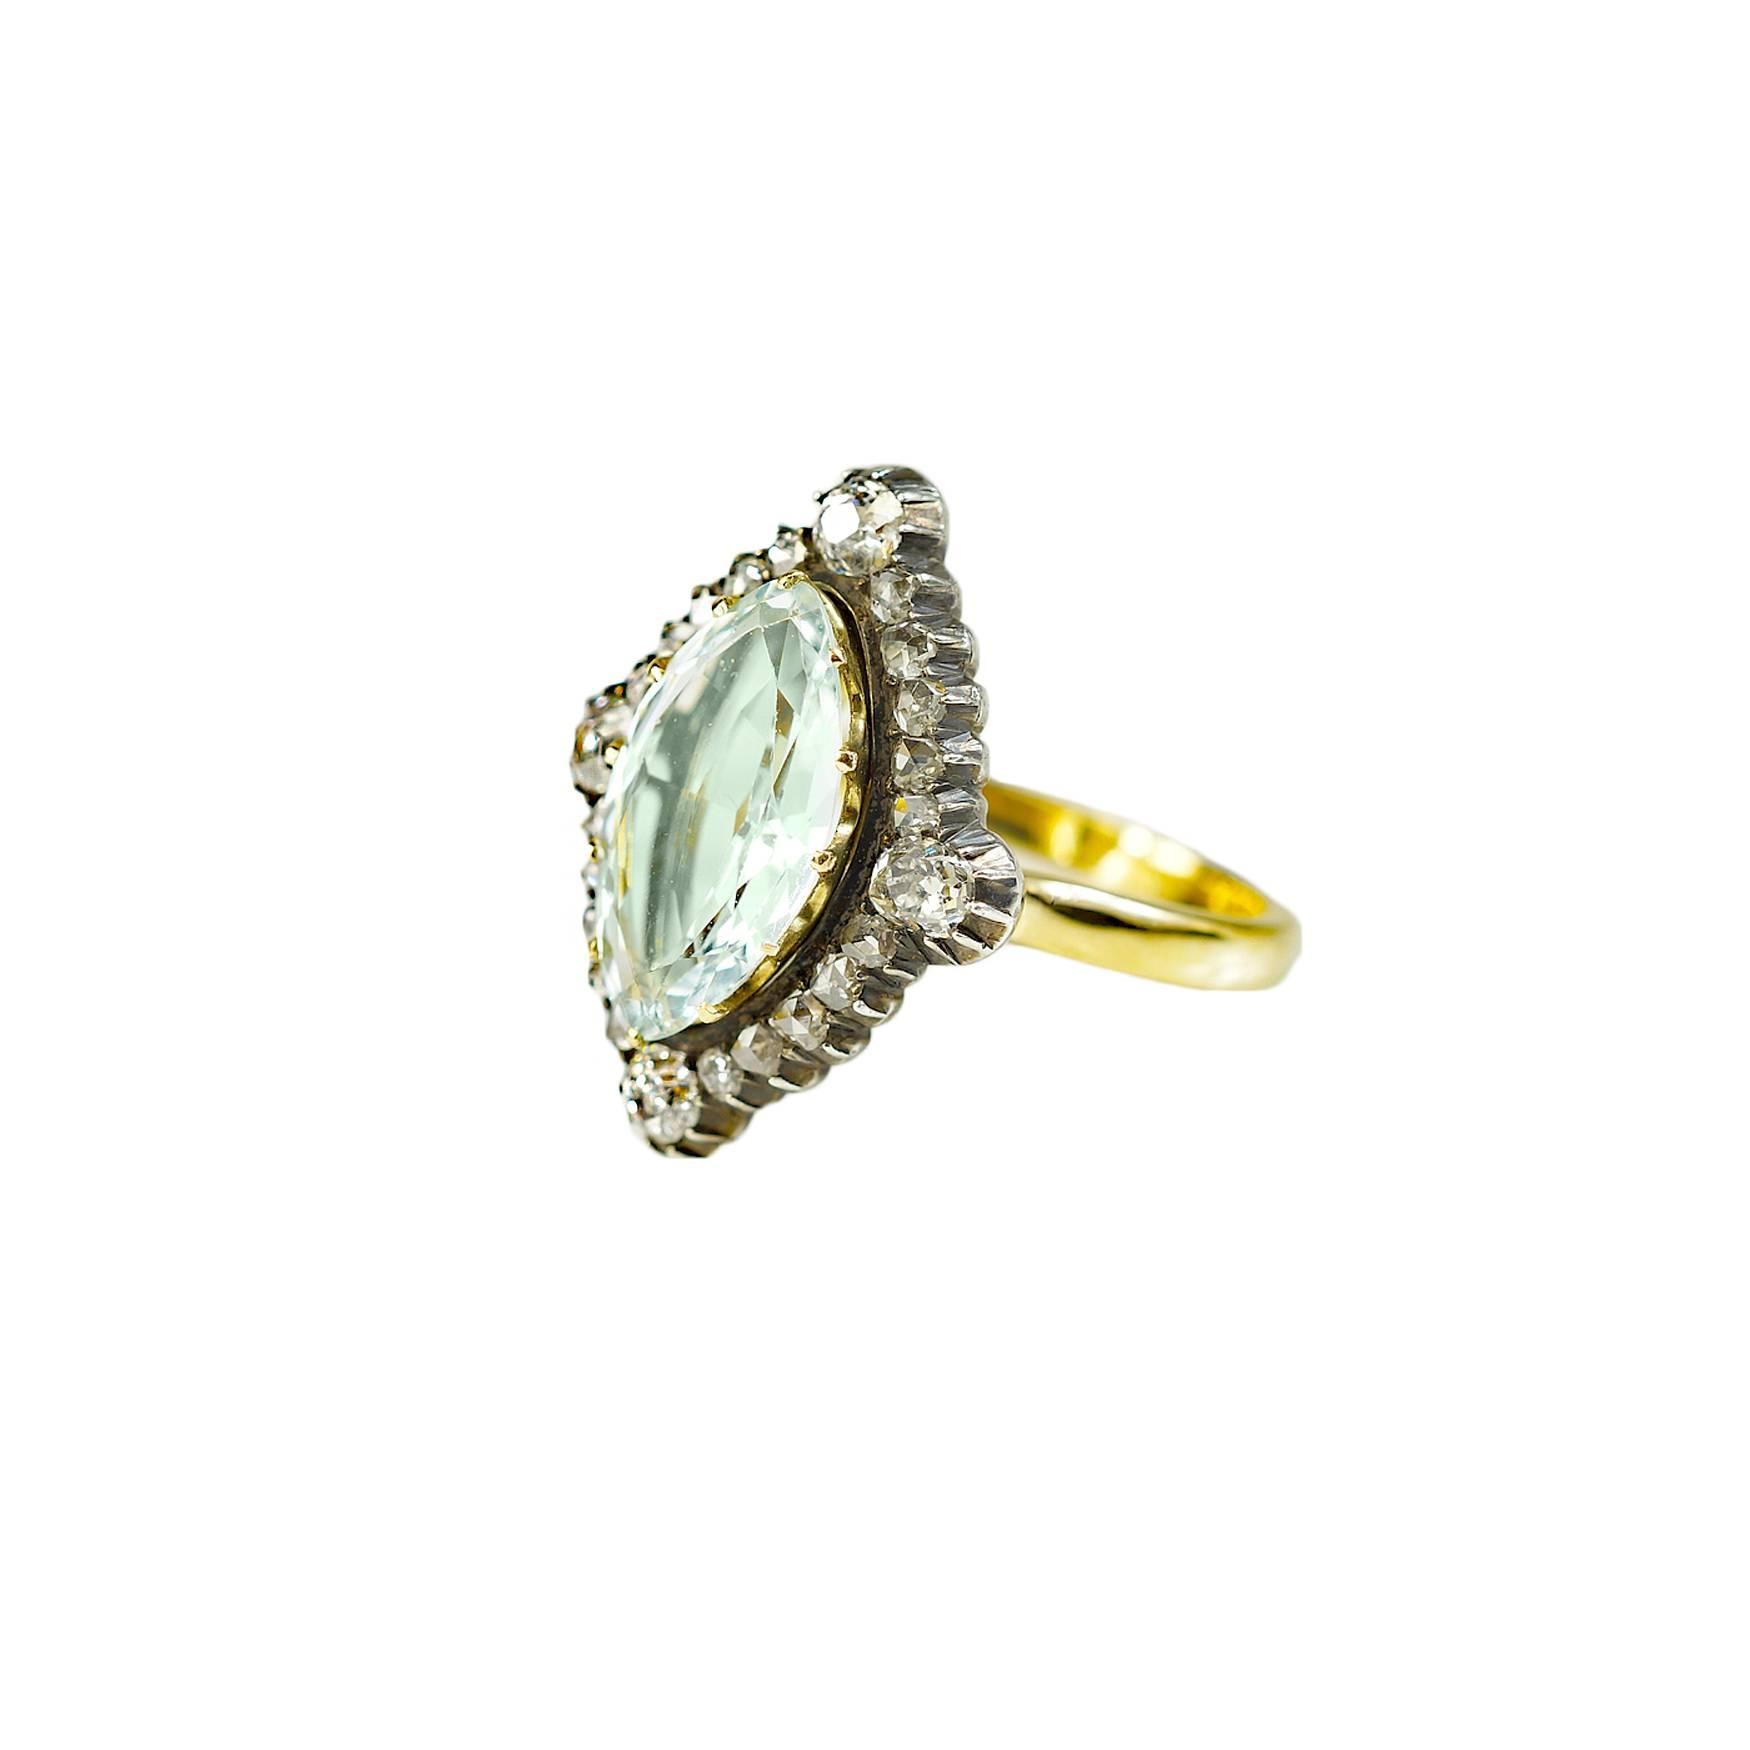 Soft beautiful bright marquise cut aquamarine center stone surrounded by rose cut diamonds and old mine cut diamonds.  Later ring mounting added in 18ct yellow gold.  